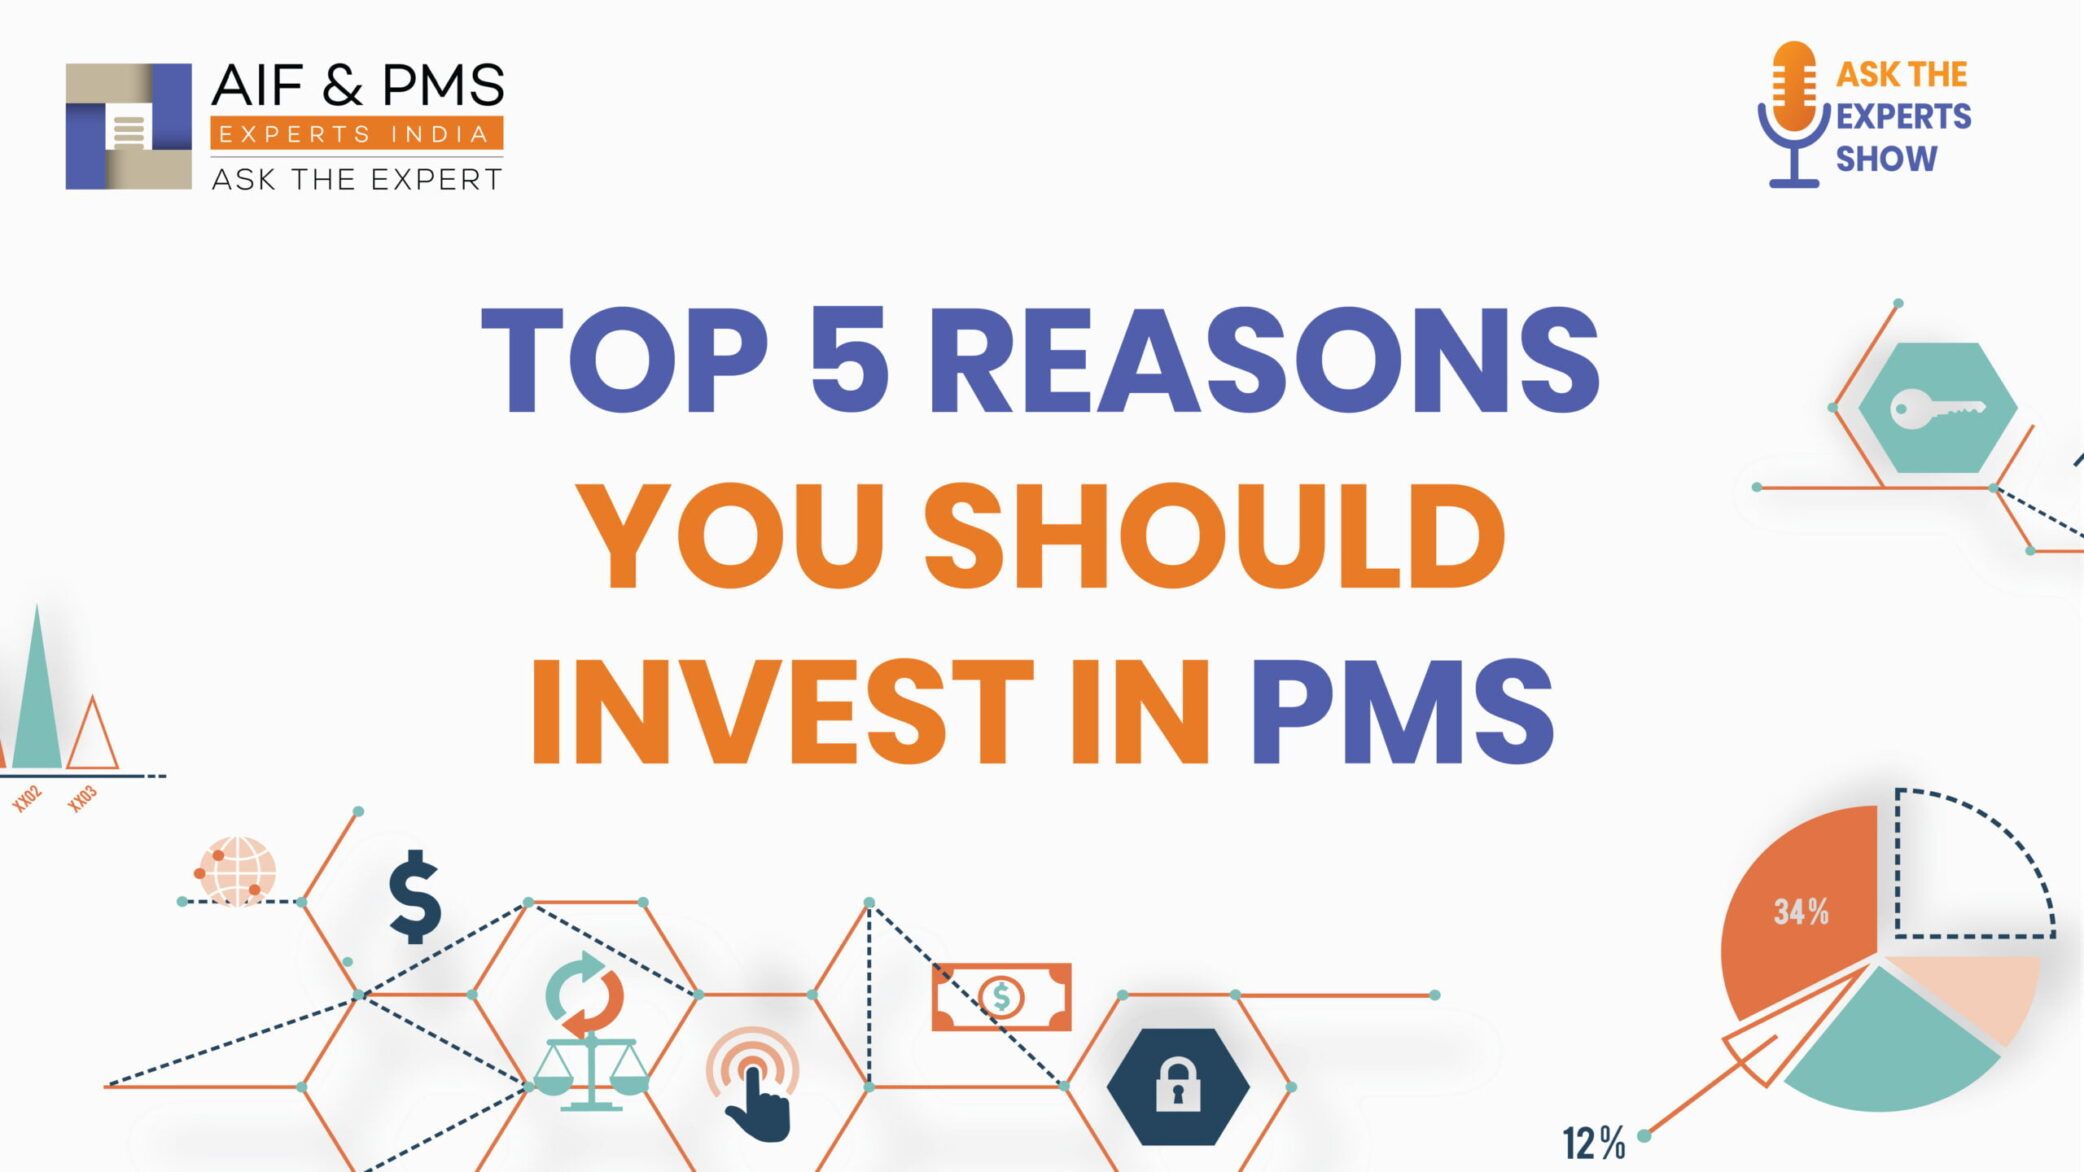 Top 5 Reasons You Should Invest in PMS - Aif & Pms Experts India